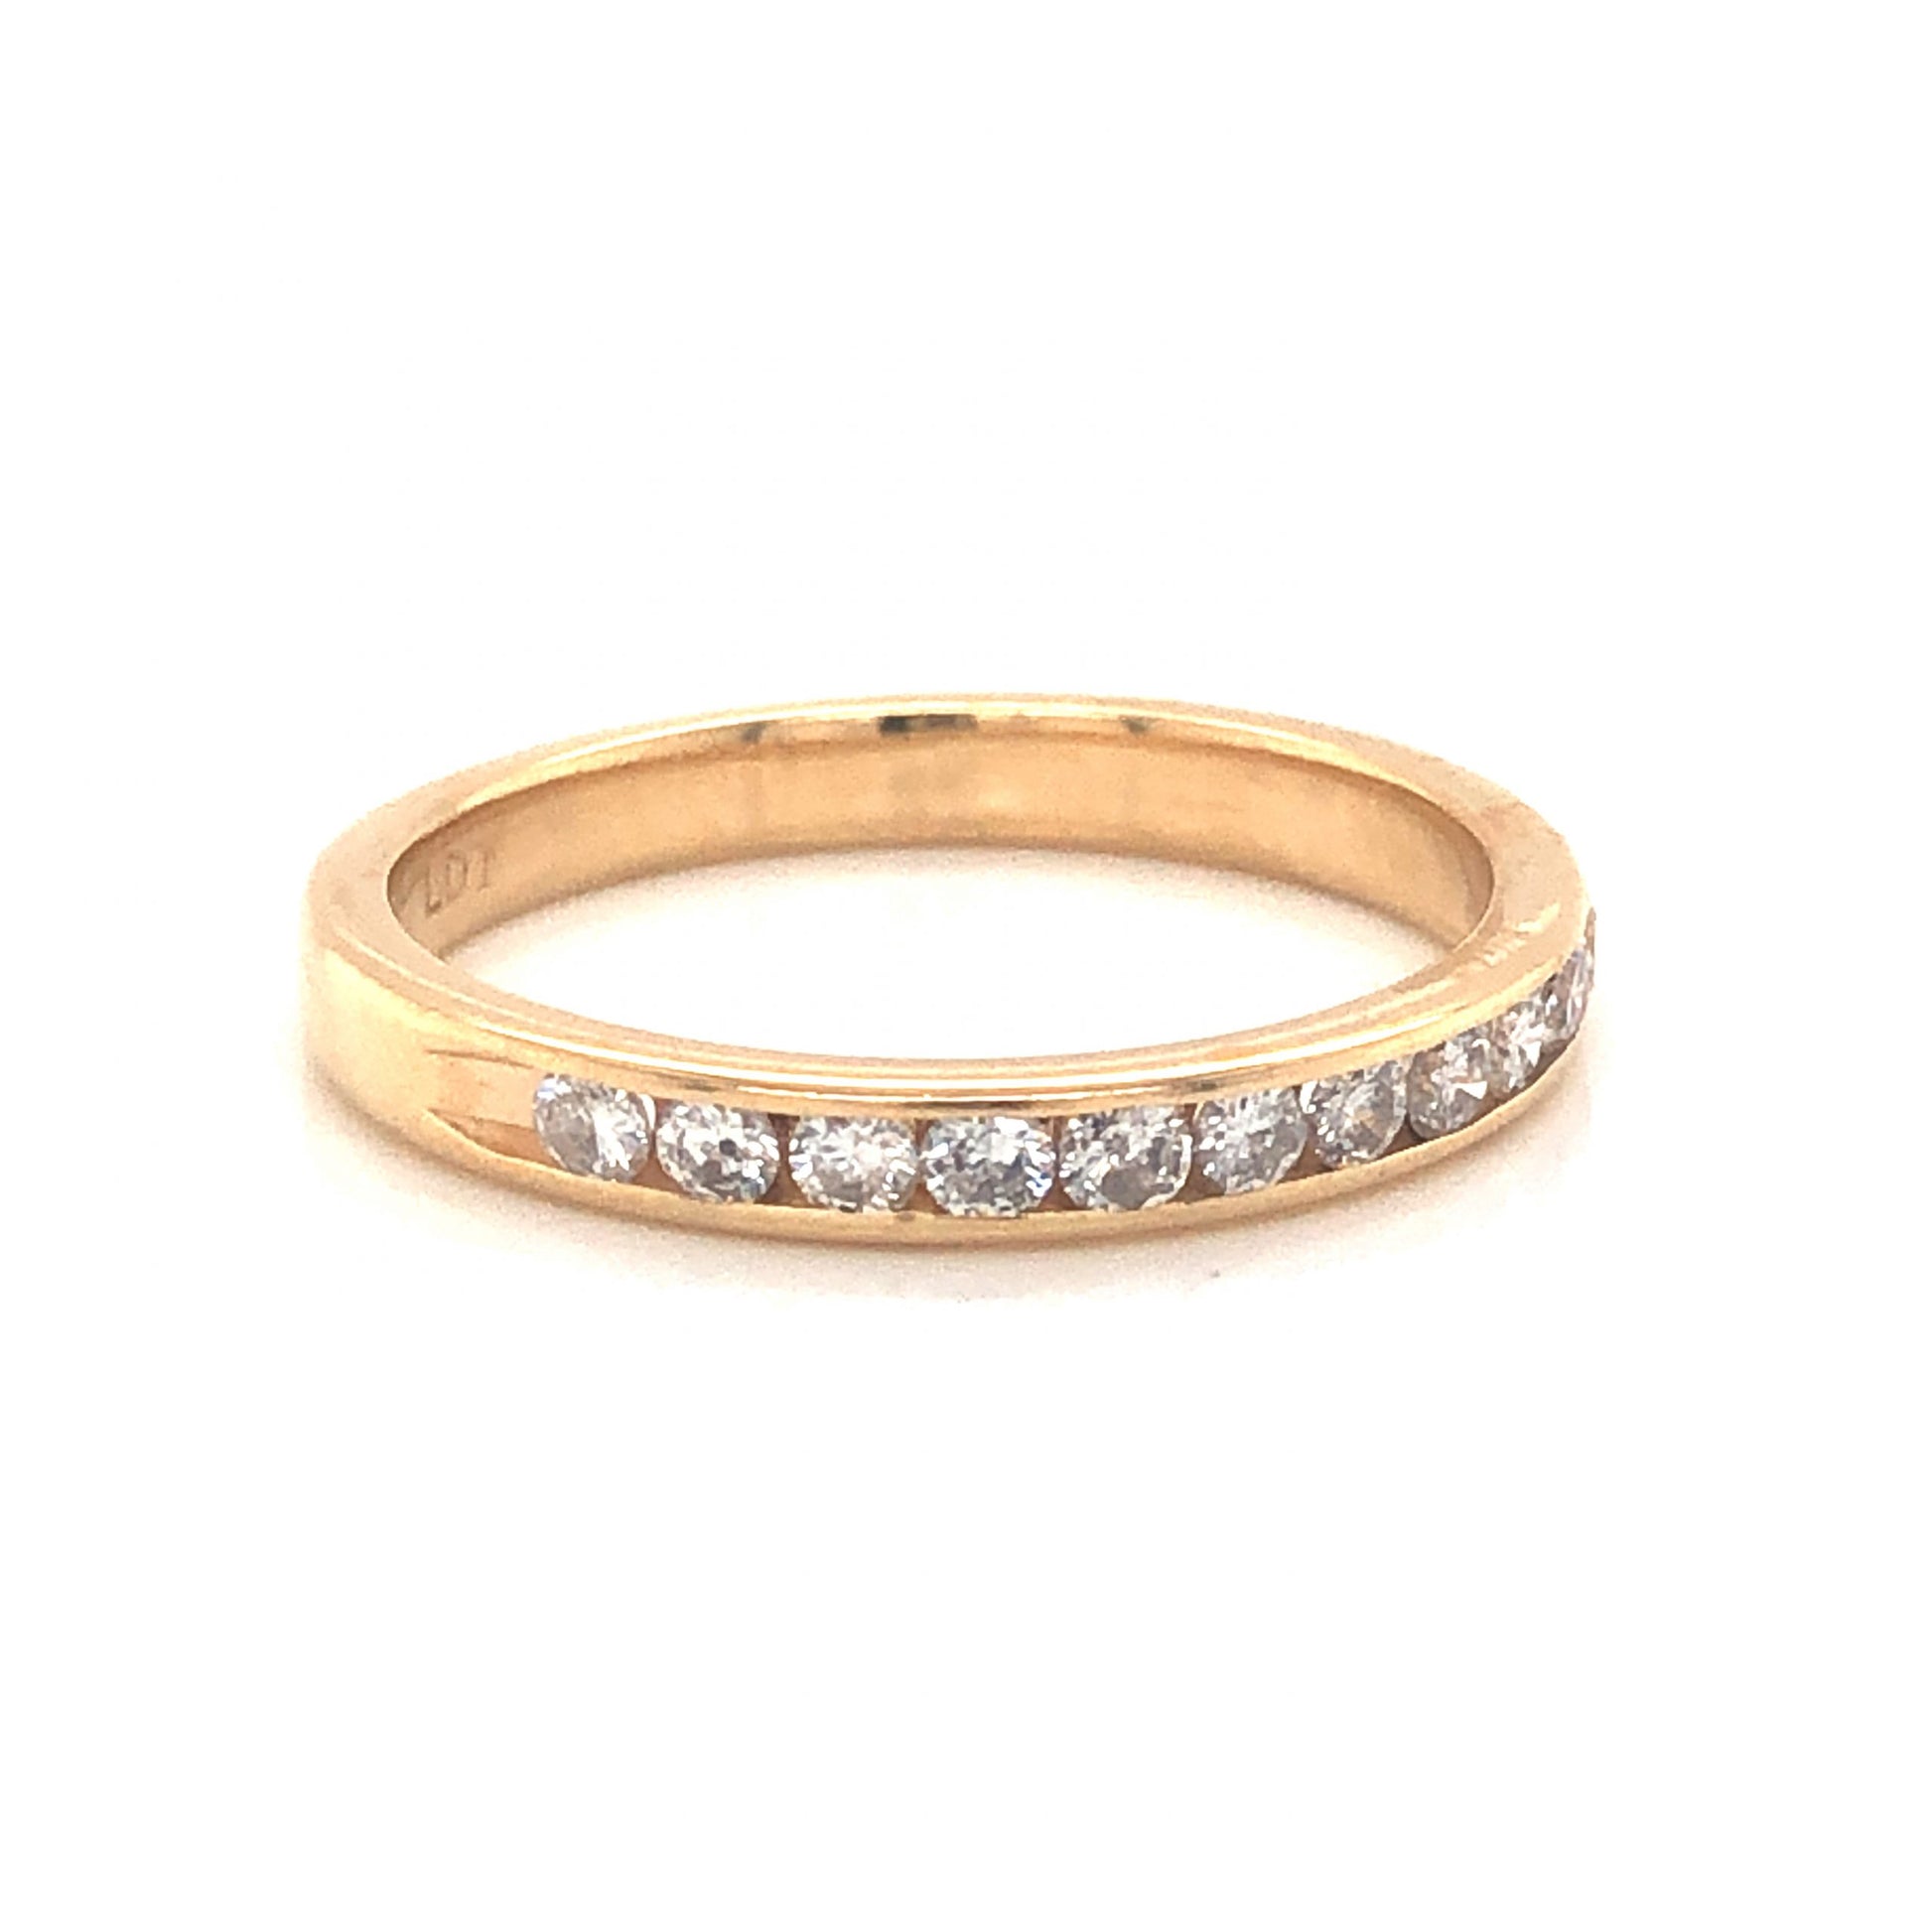 .33 Channel Set Diamond Wedding Band in 14k Yellow GoldComposition: 14 Karat Yellow Gold Ring Size: 7 Total Diamond Weight: .33ct Total Gram Weight: 2.2 g Inscription: 14k LDT
      